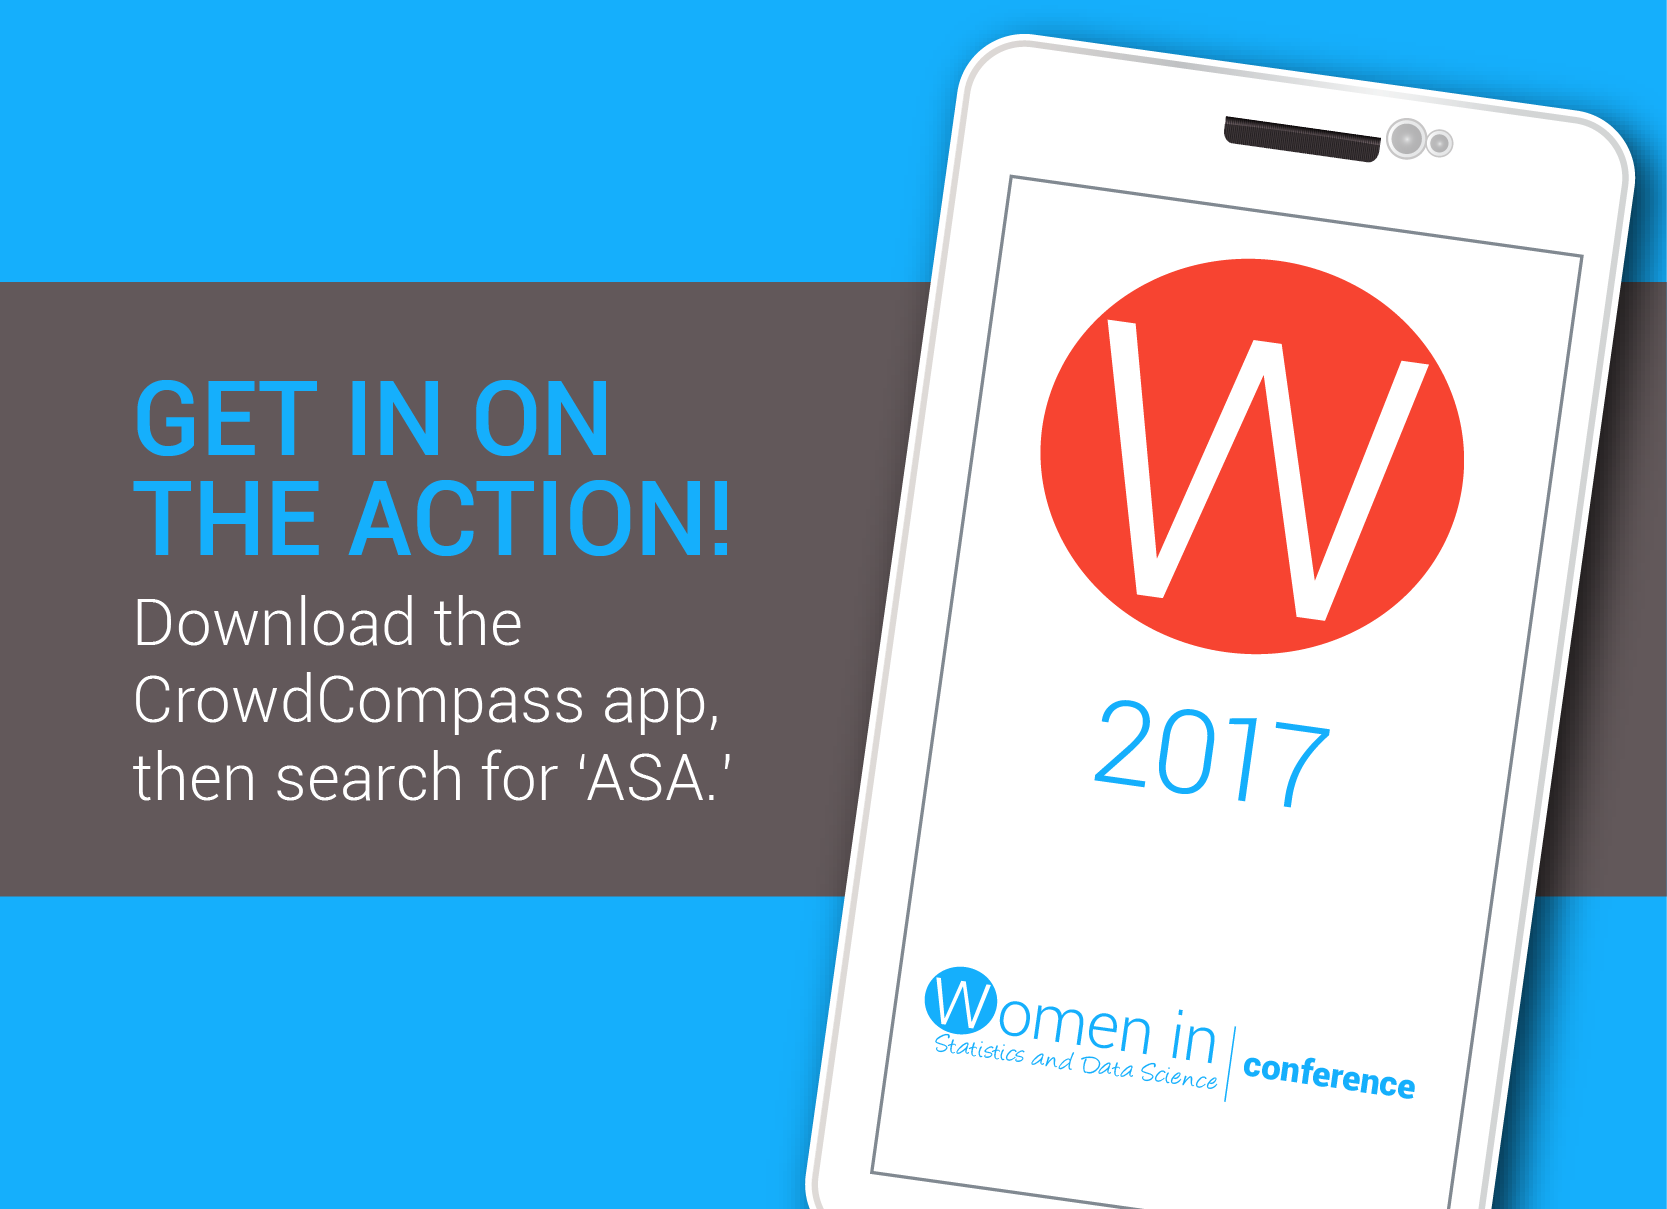 Get in on the action! Download the CrowdCompass app, then search for ASA. 